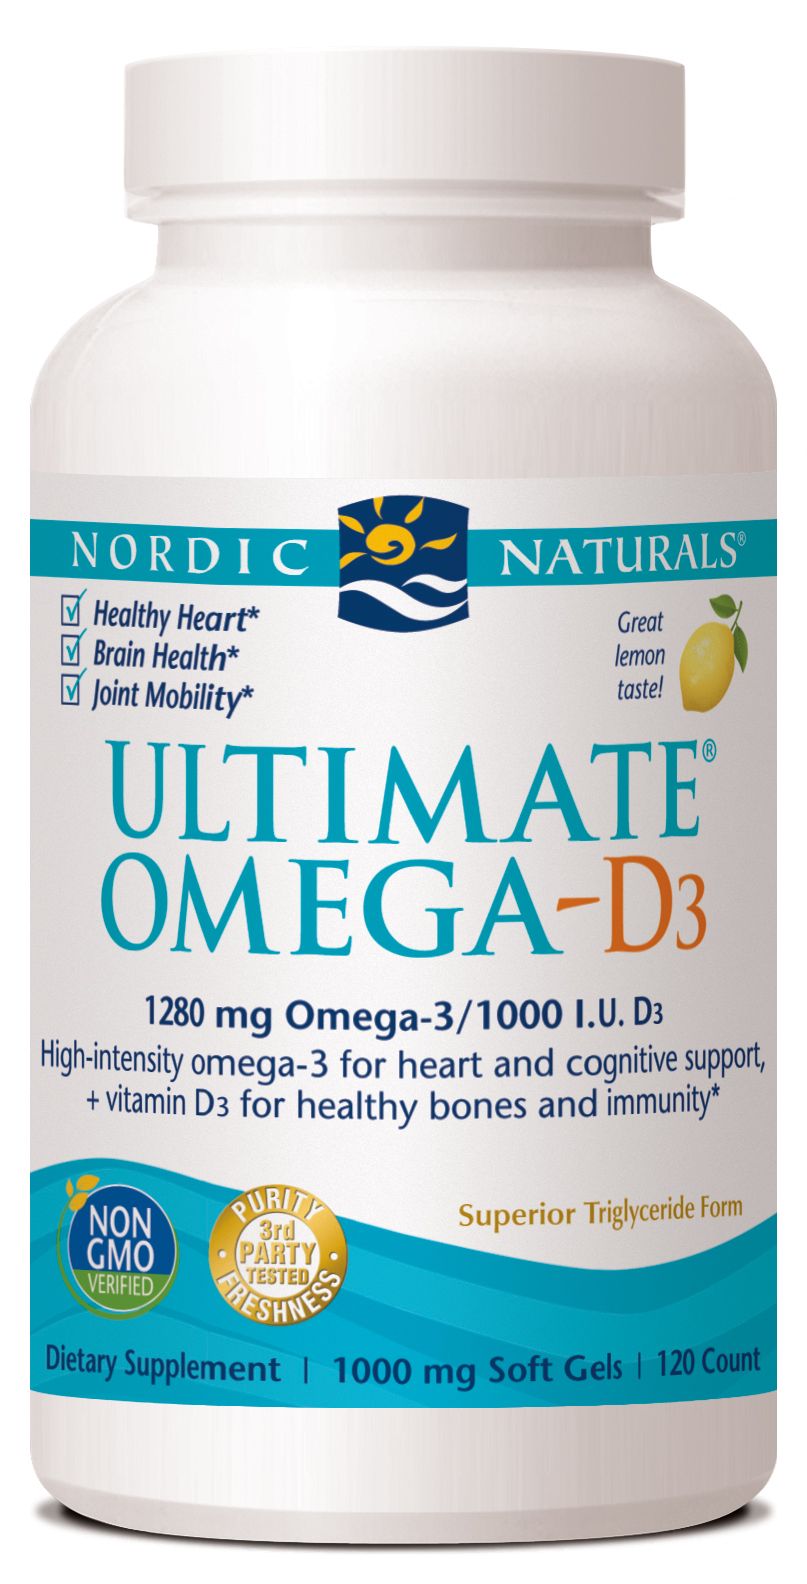 Nordic Naturals Ultimate Omega-D3 120 softgels - High-quality Oils/EFAs by Nordic Naturals at 